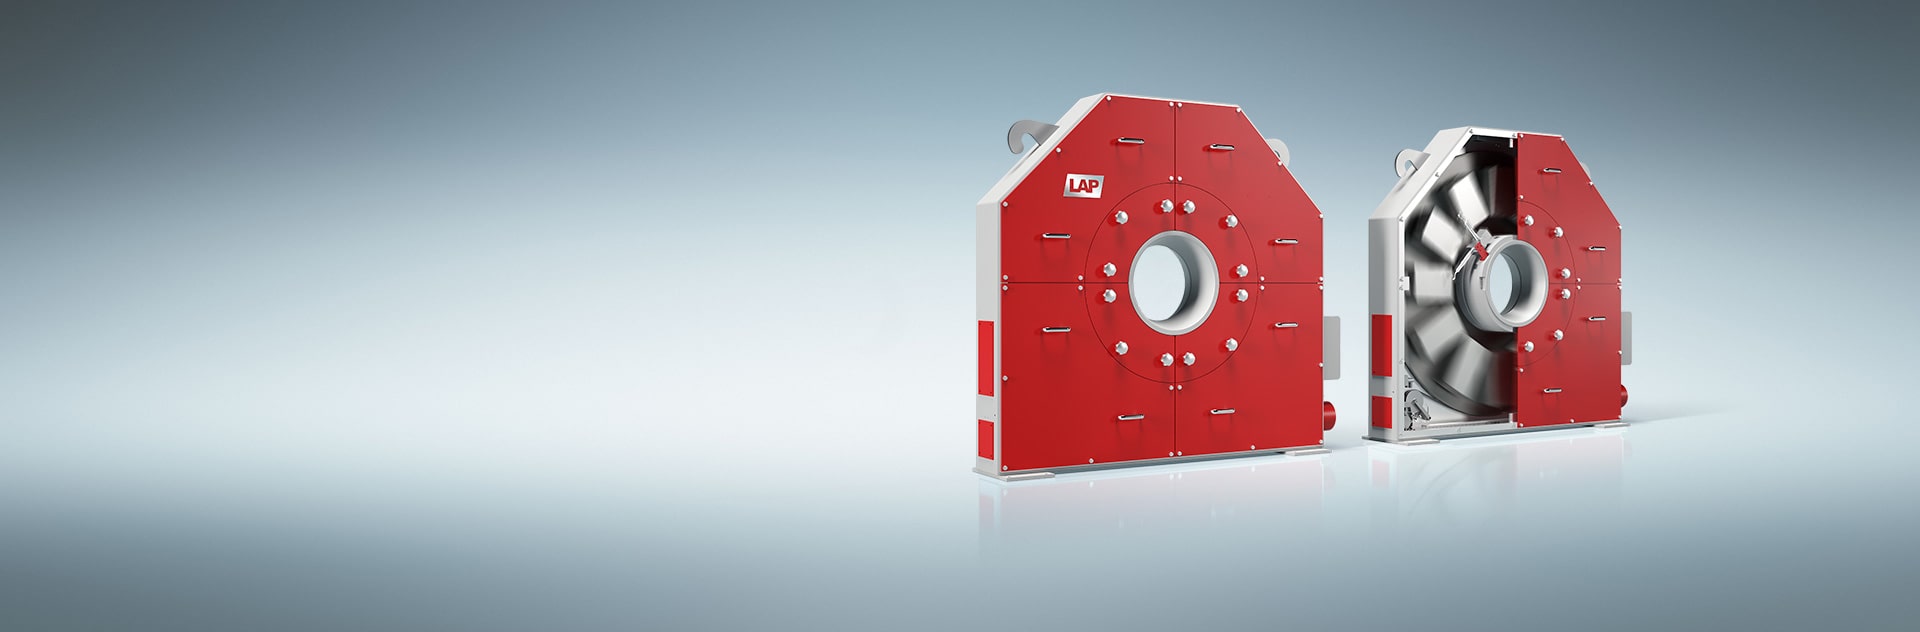 LAP's robust laser measuring system for the contour measurement of round and square steel profiles. 